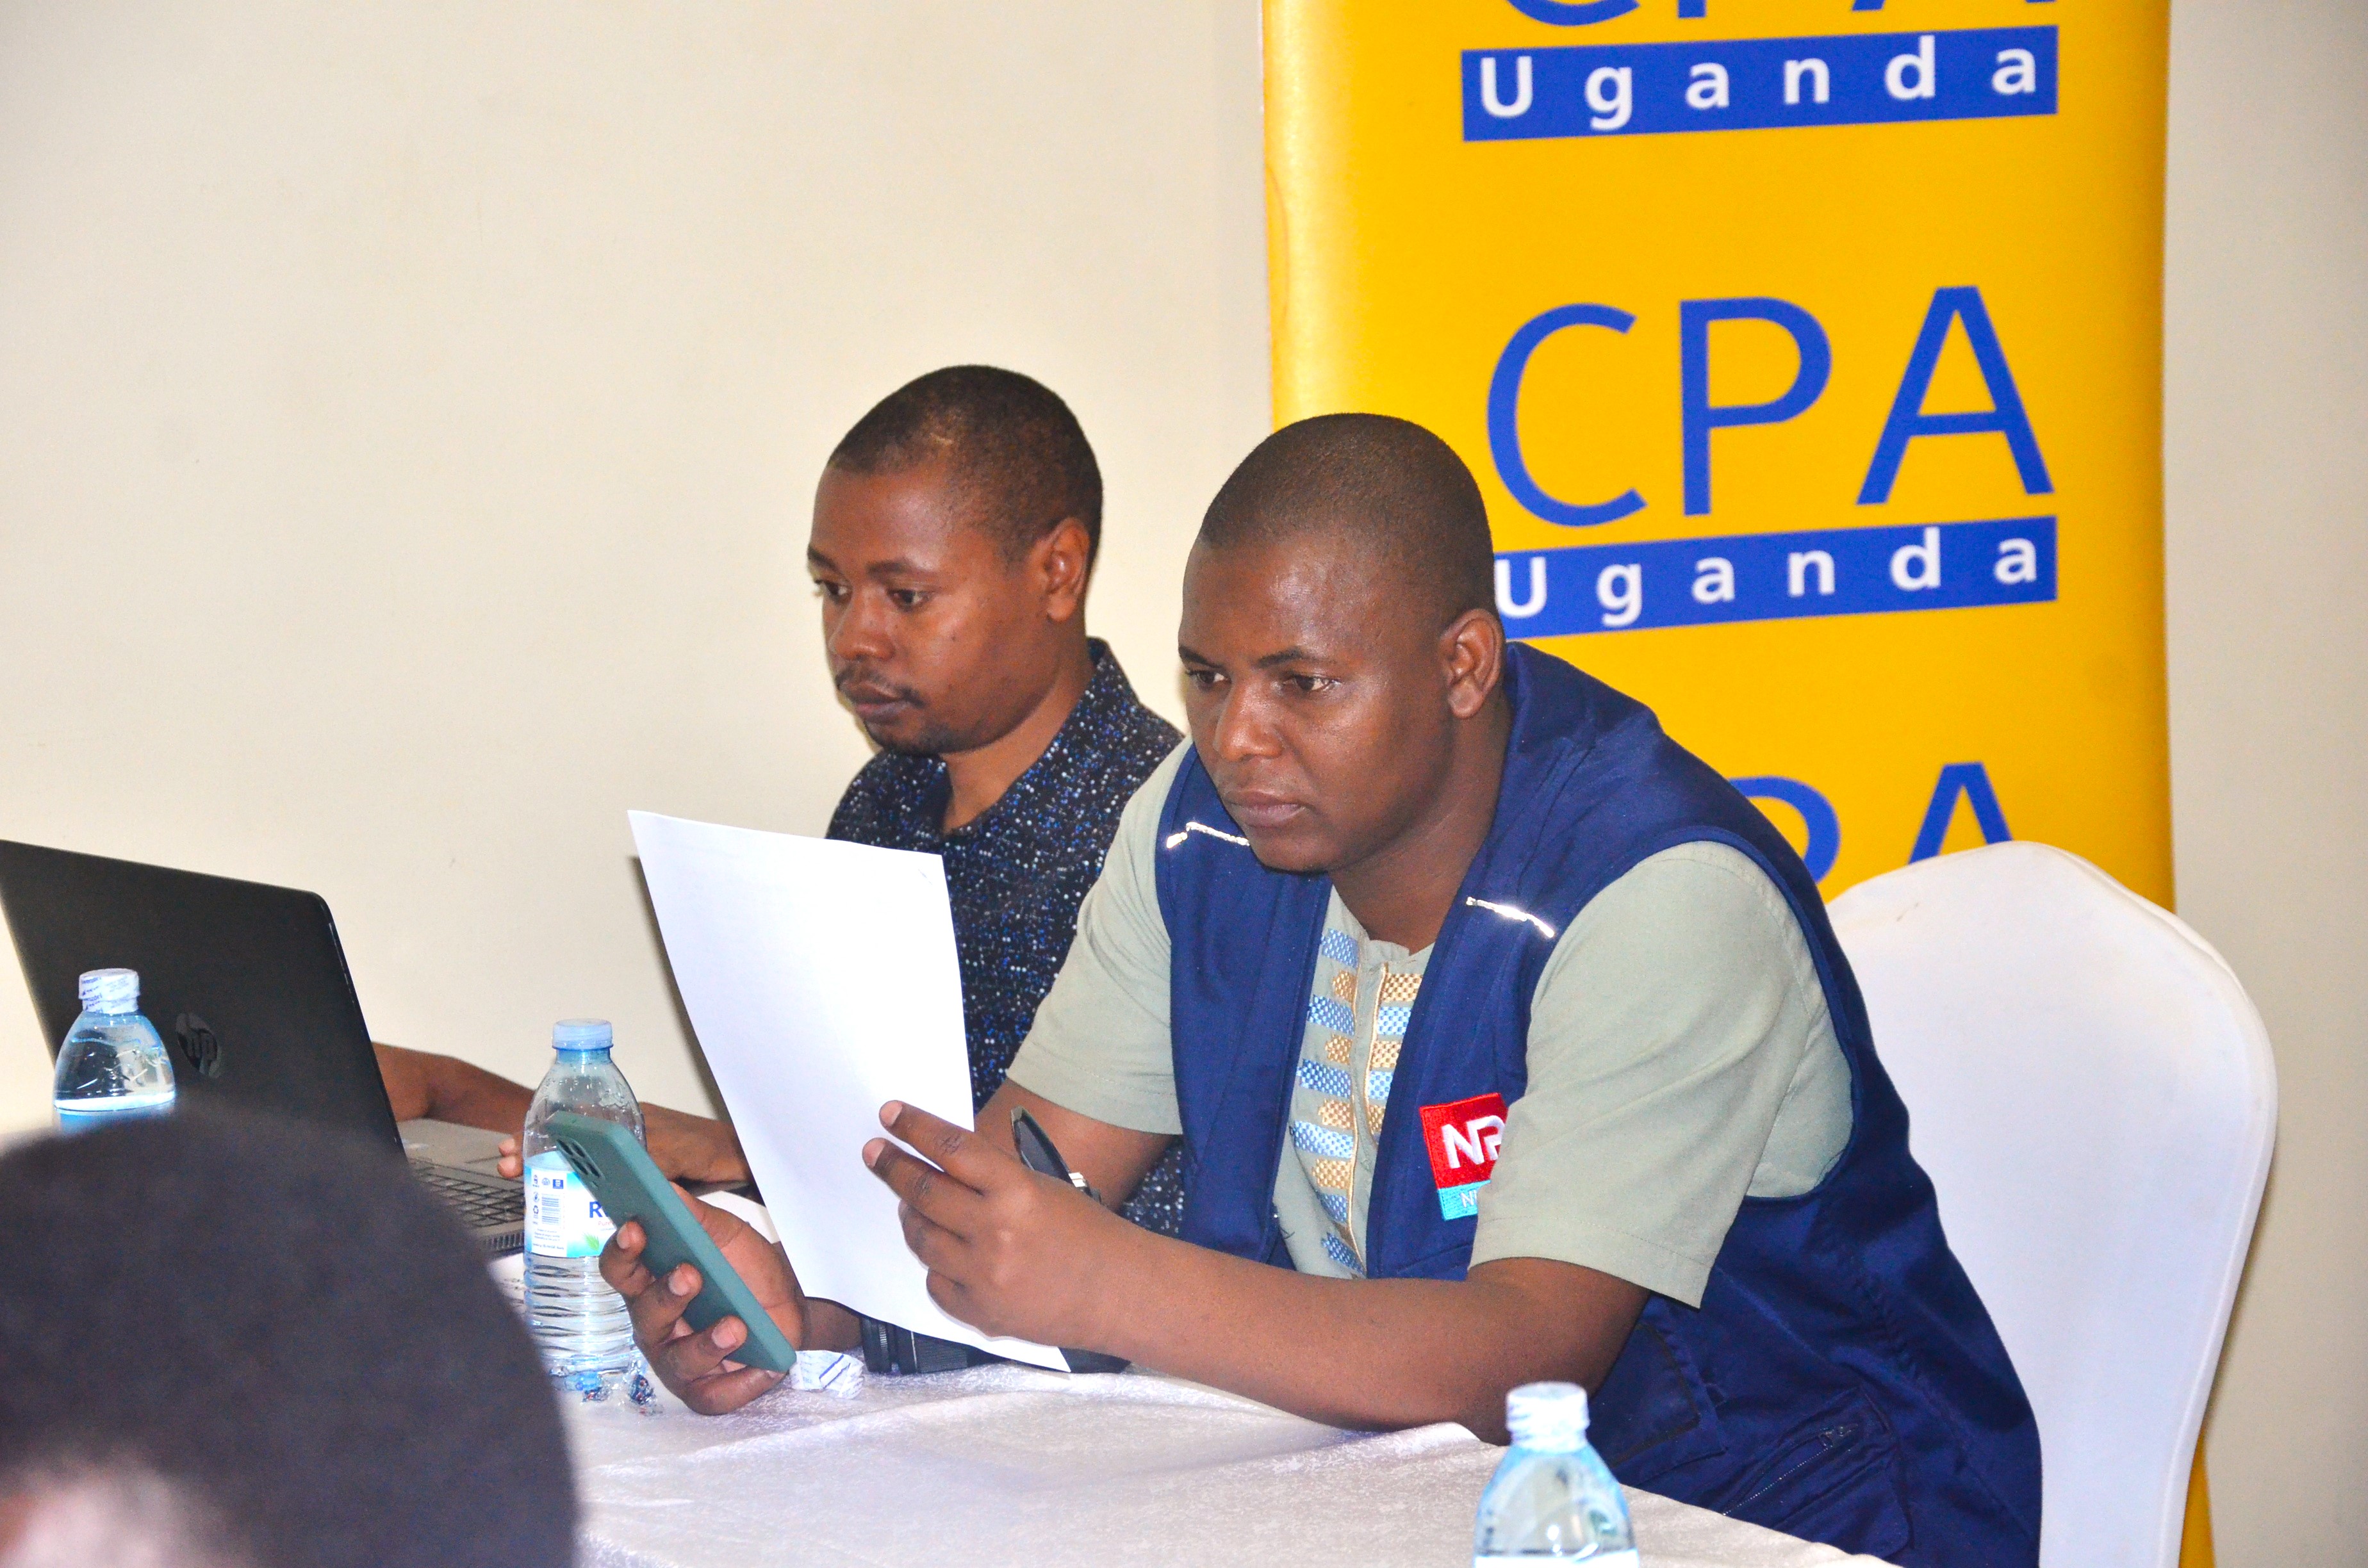 Some of the journalists attending the release of the ICPAU August examination results at Protea Skyz Hotel, Naguru.